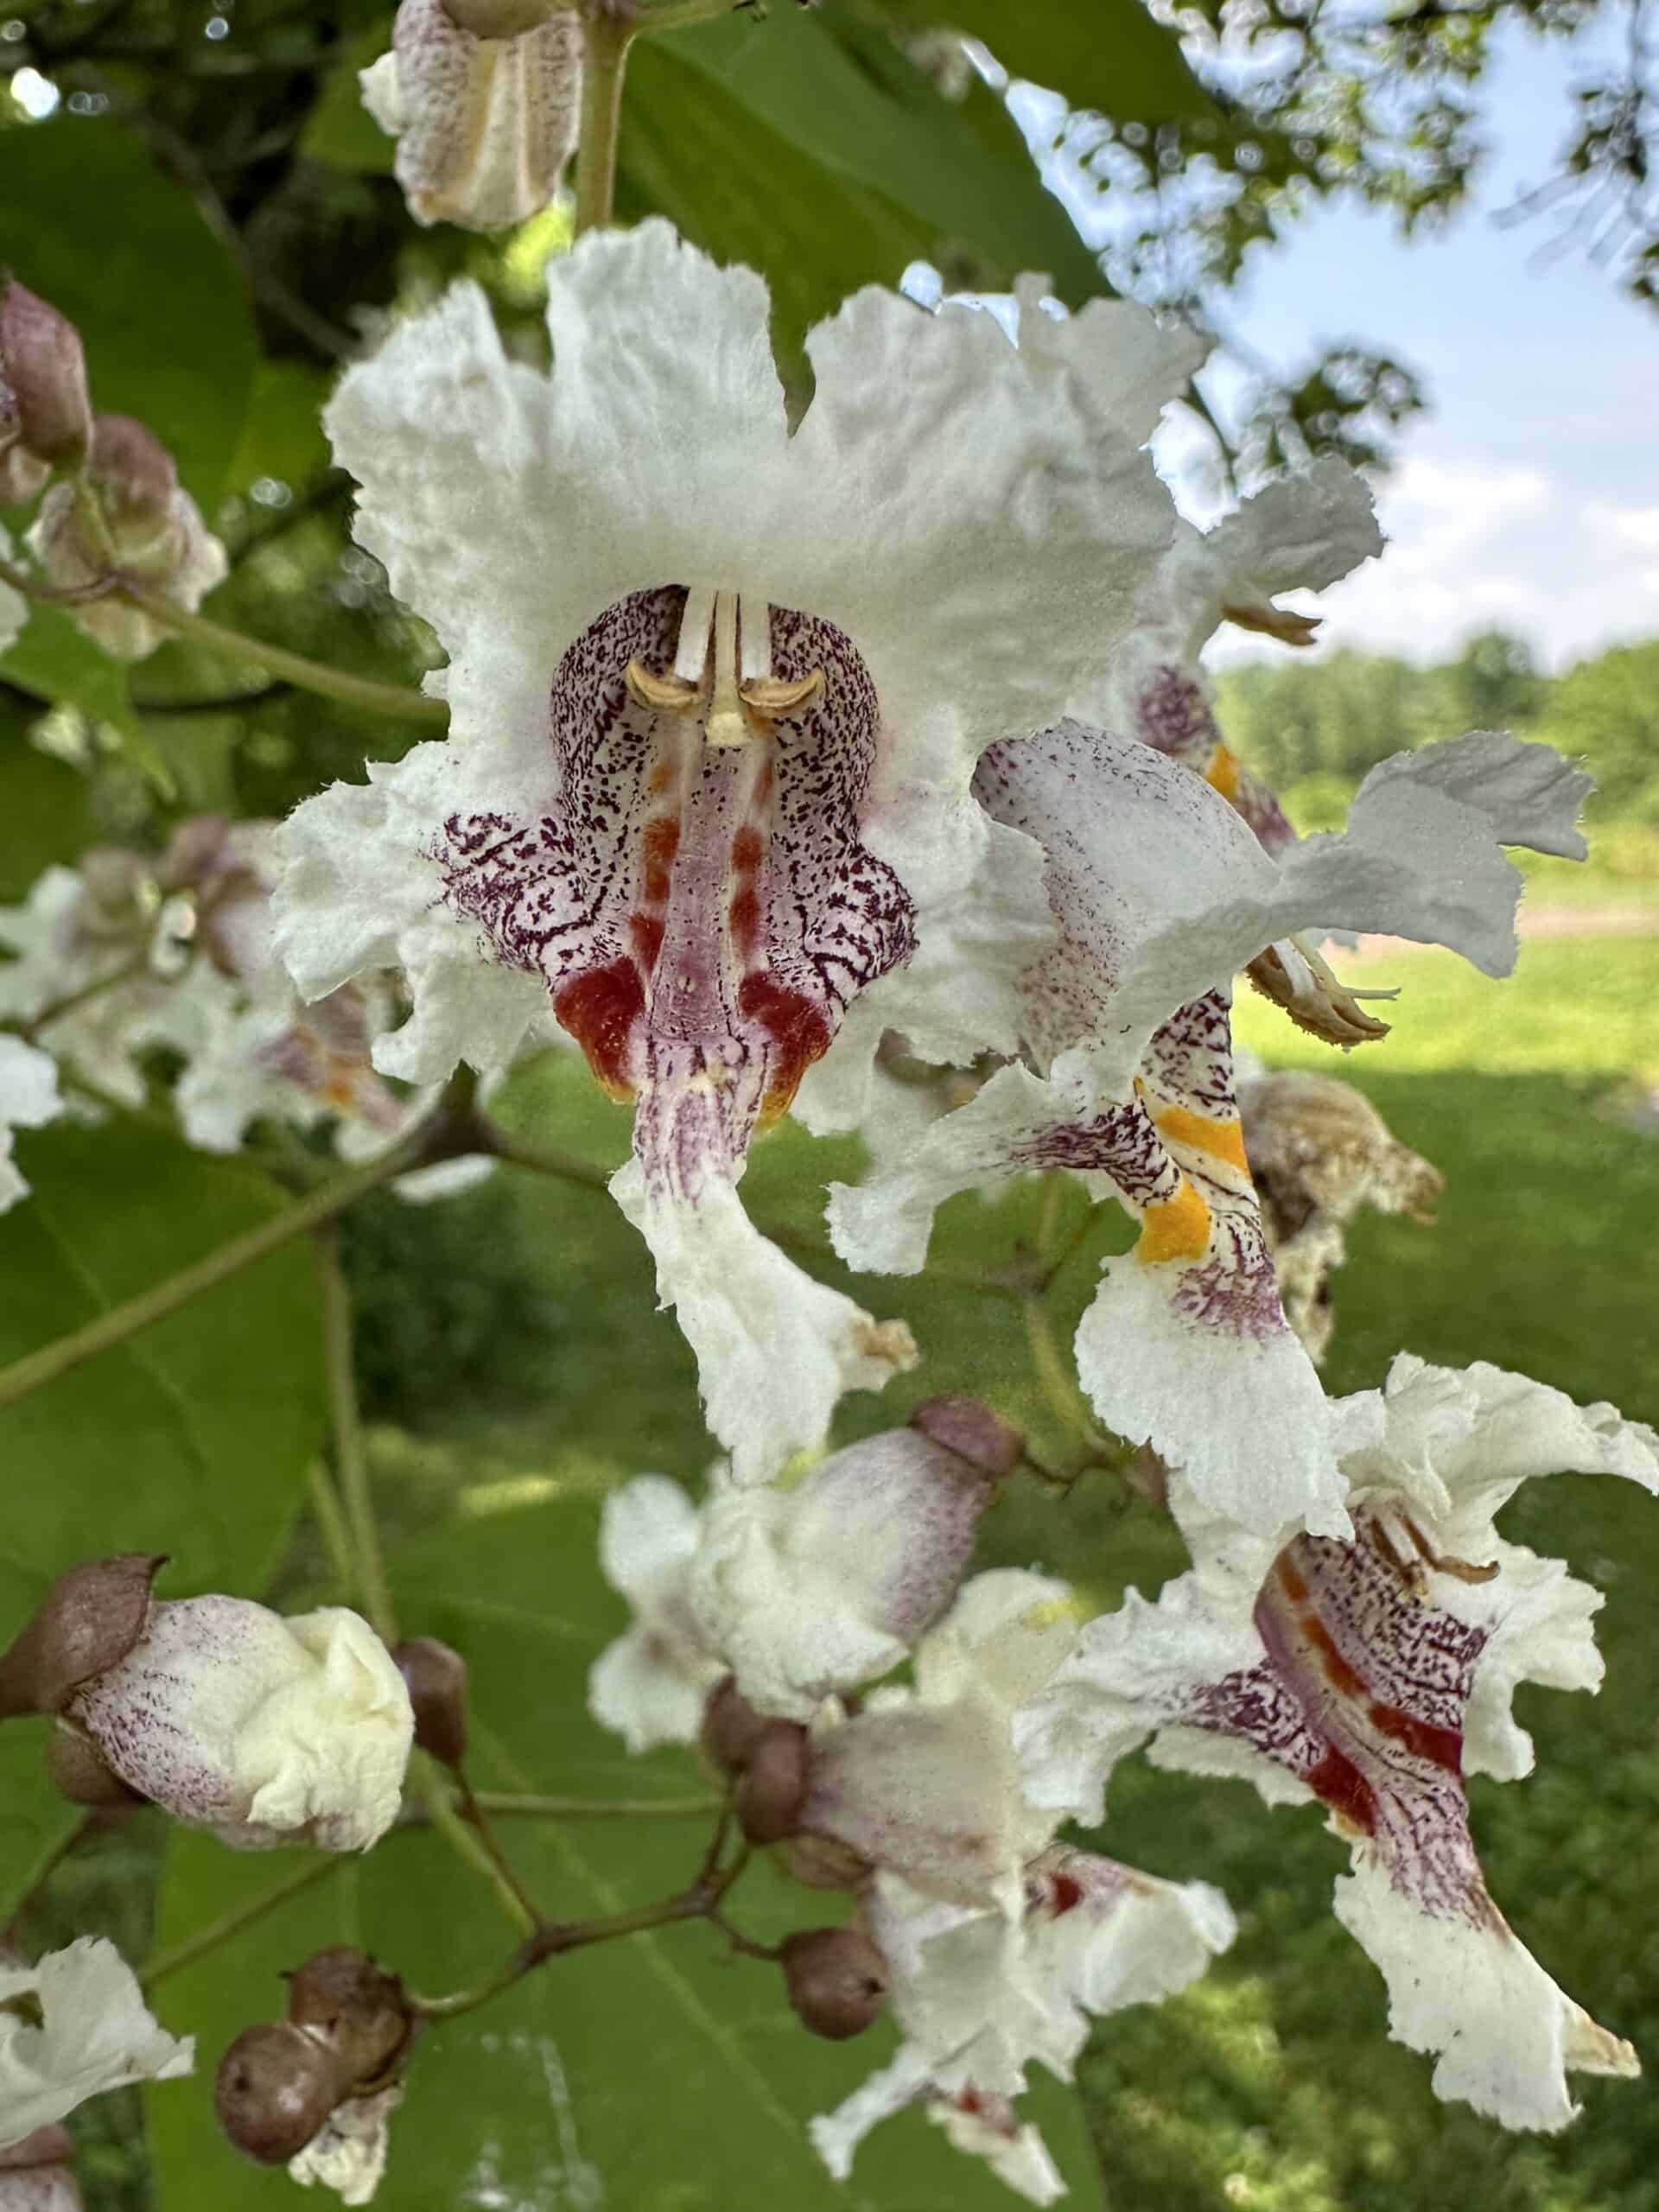 Closeup of the flowers of a catalpa tree: frilly white tubes with purple spots leading down the throat.